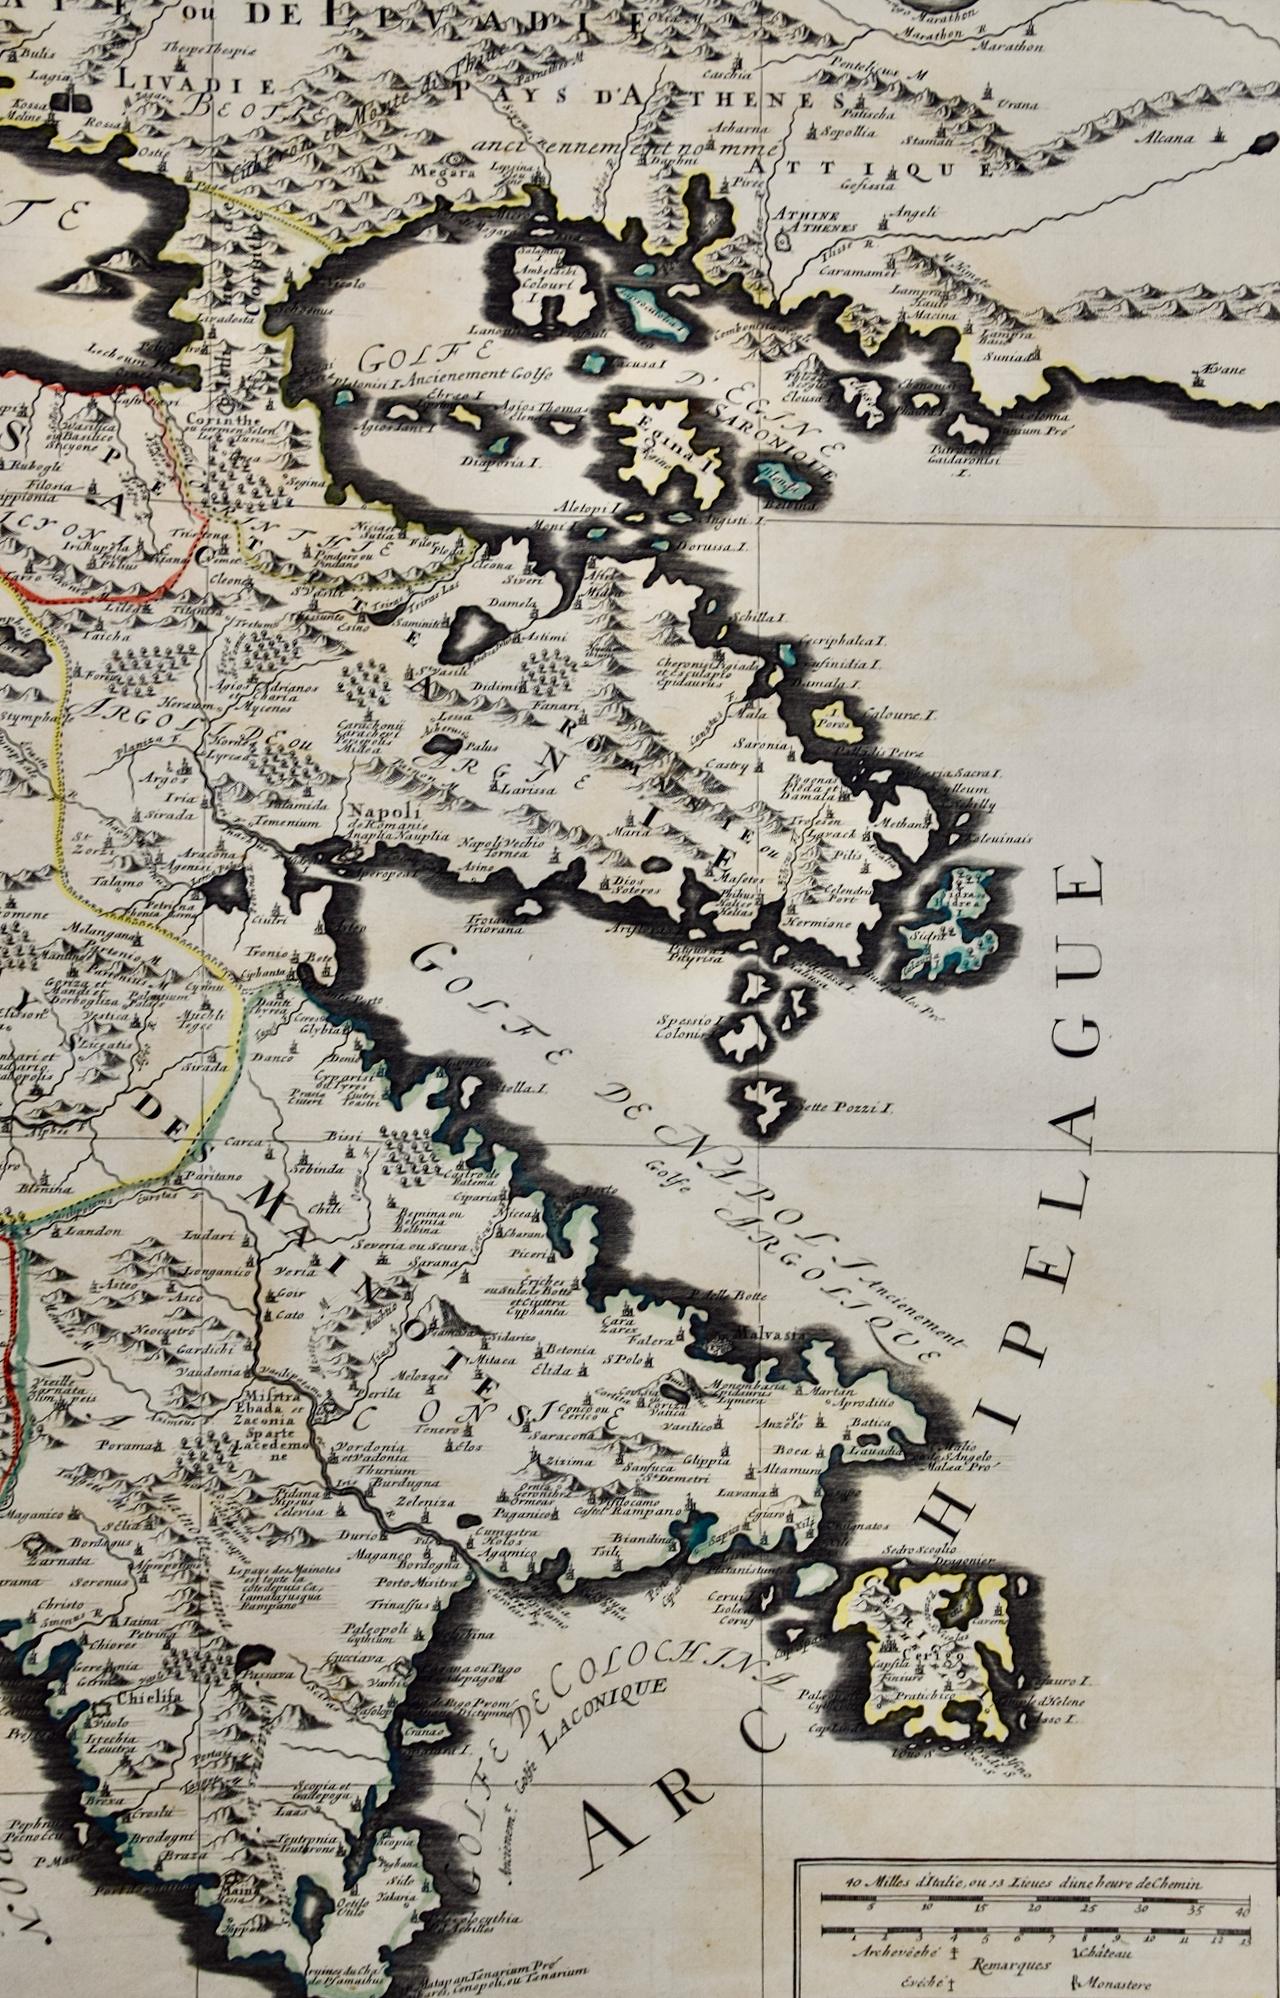 Engraved Southern Greece: A Large 17th C. Hand-colored Map by Sanson and Jaillot For Sale